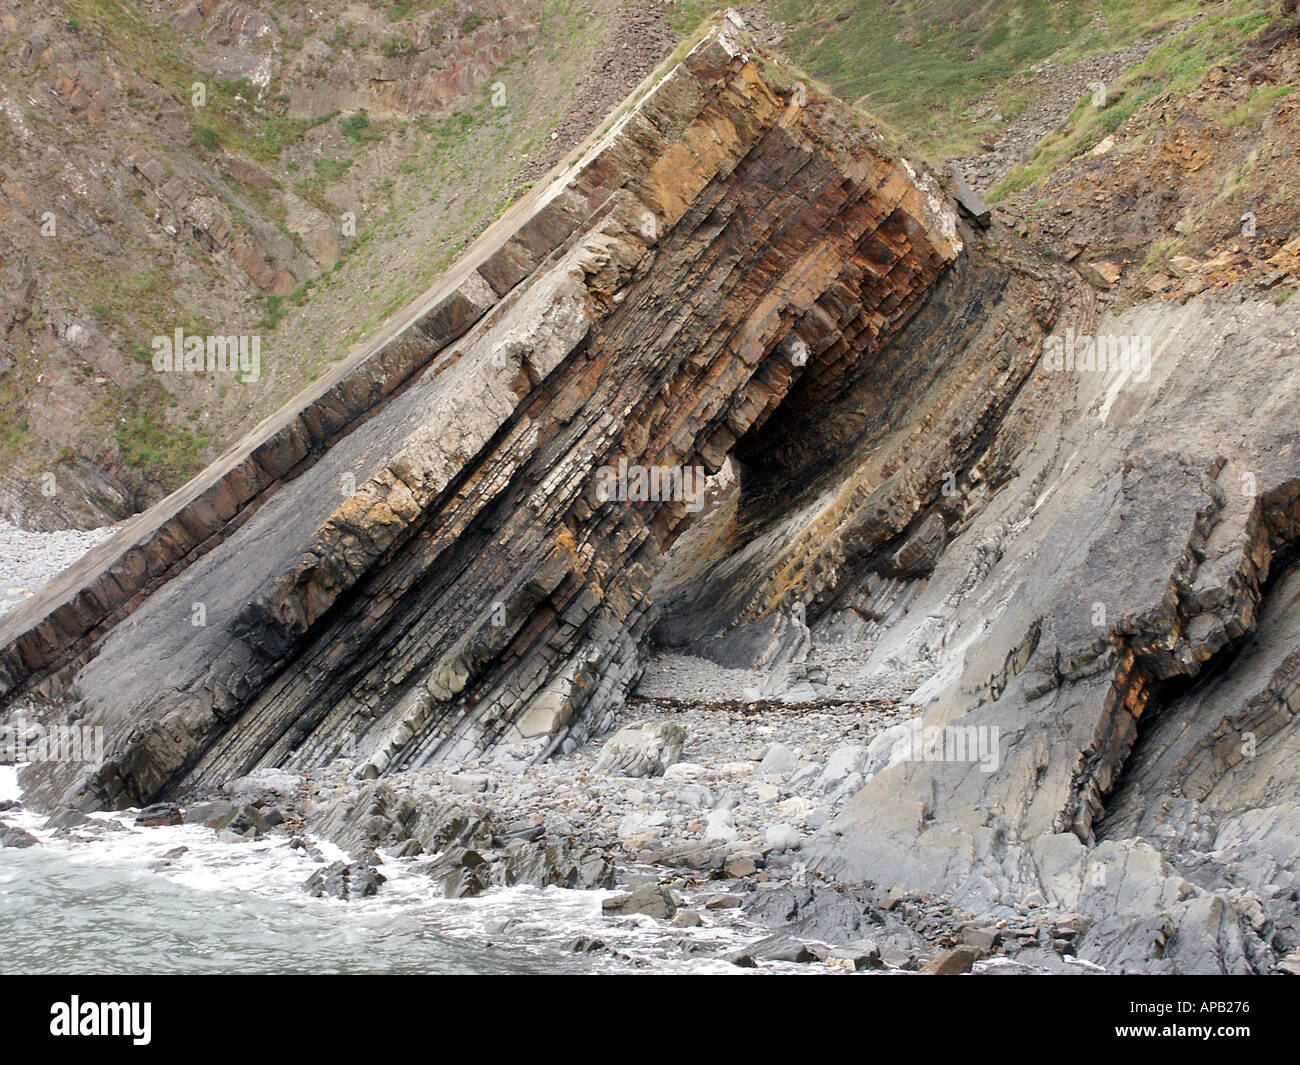 Geological formations at Hartland Quay in Devon.  Strata beach waves and sea visible. Stock Photo